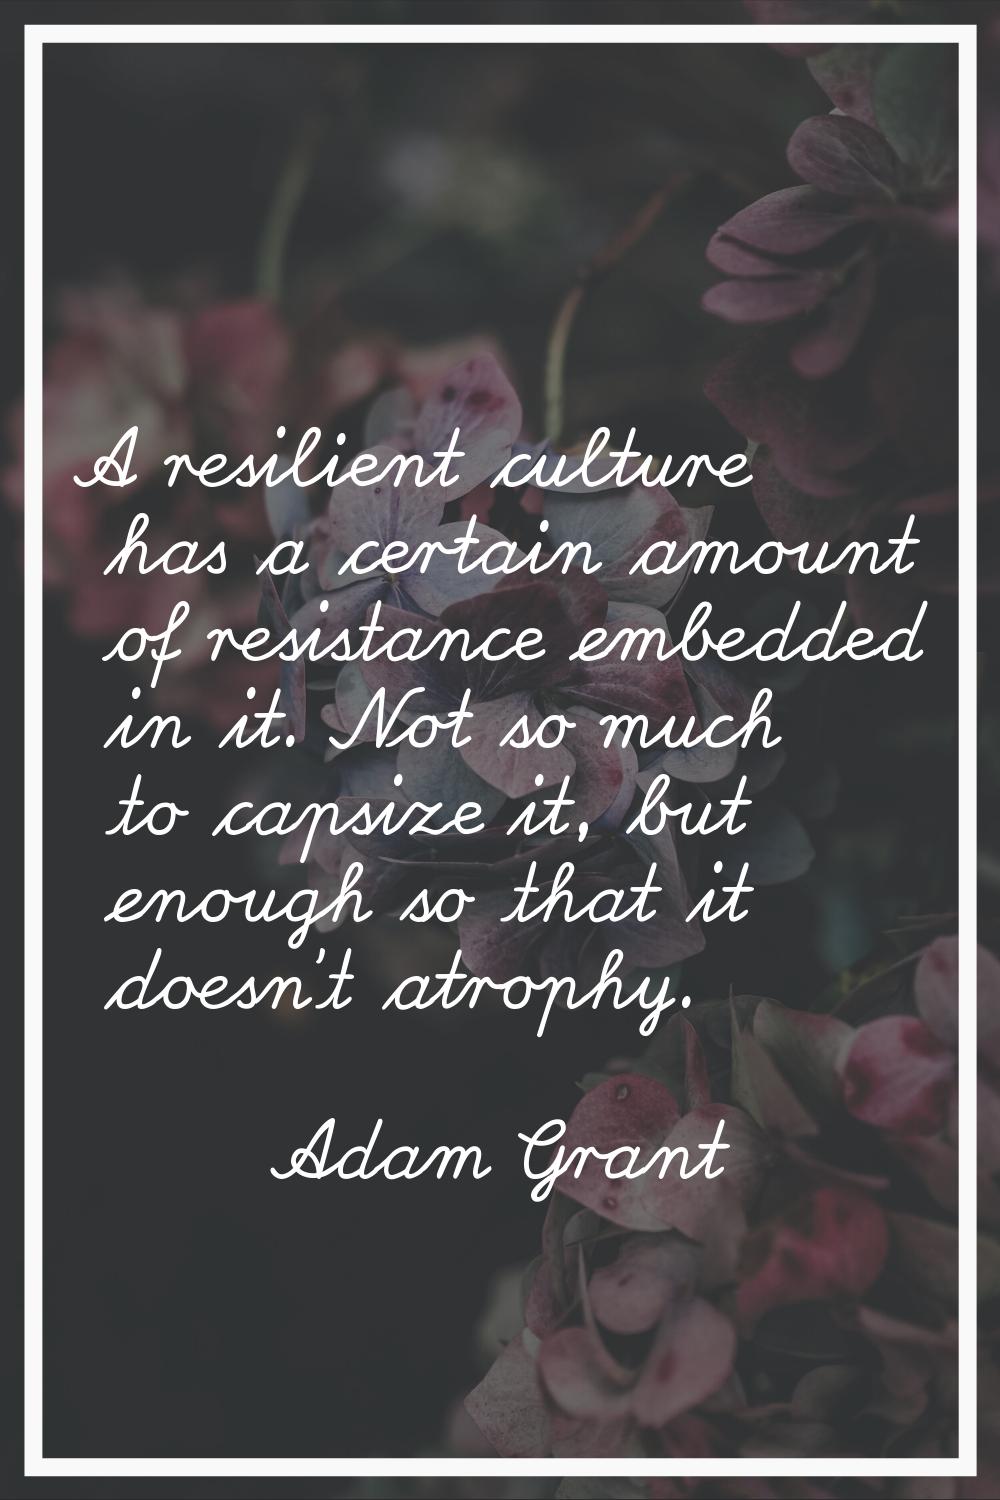 A resilient culture has a certain amount of resistance embedded in it. Not so much to capsize it, b